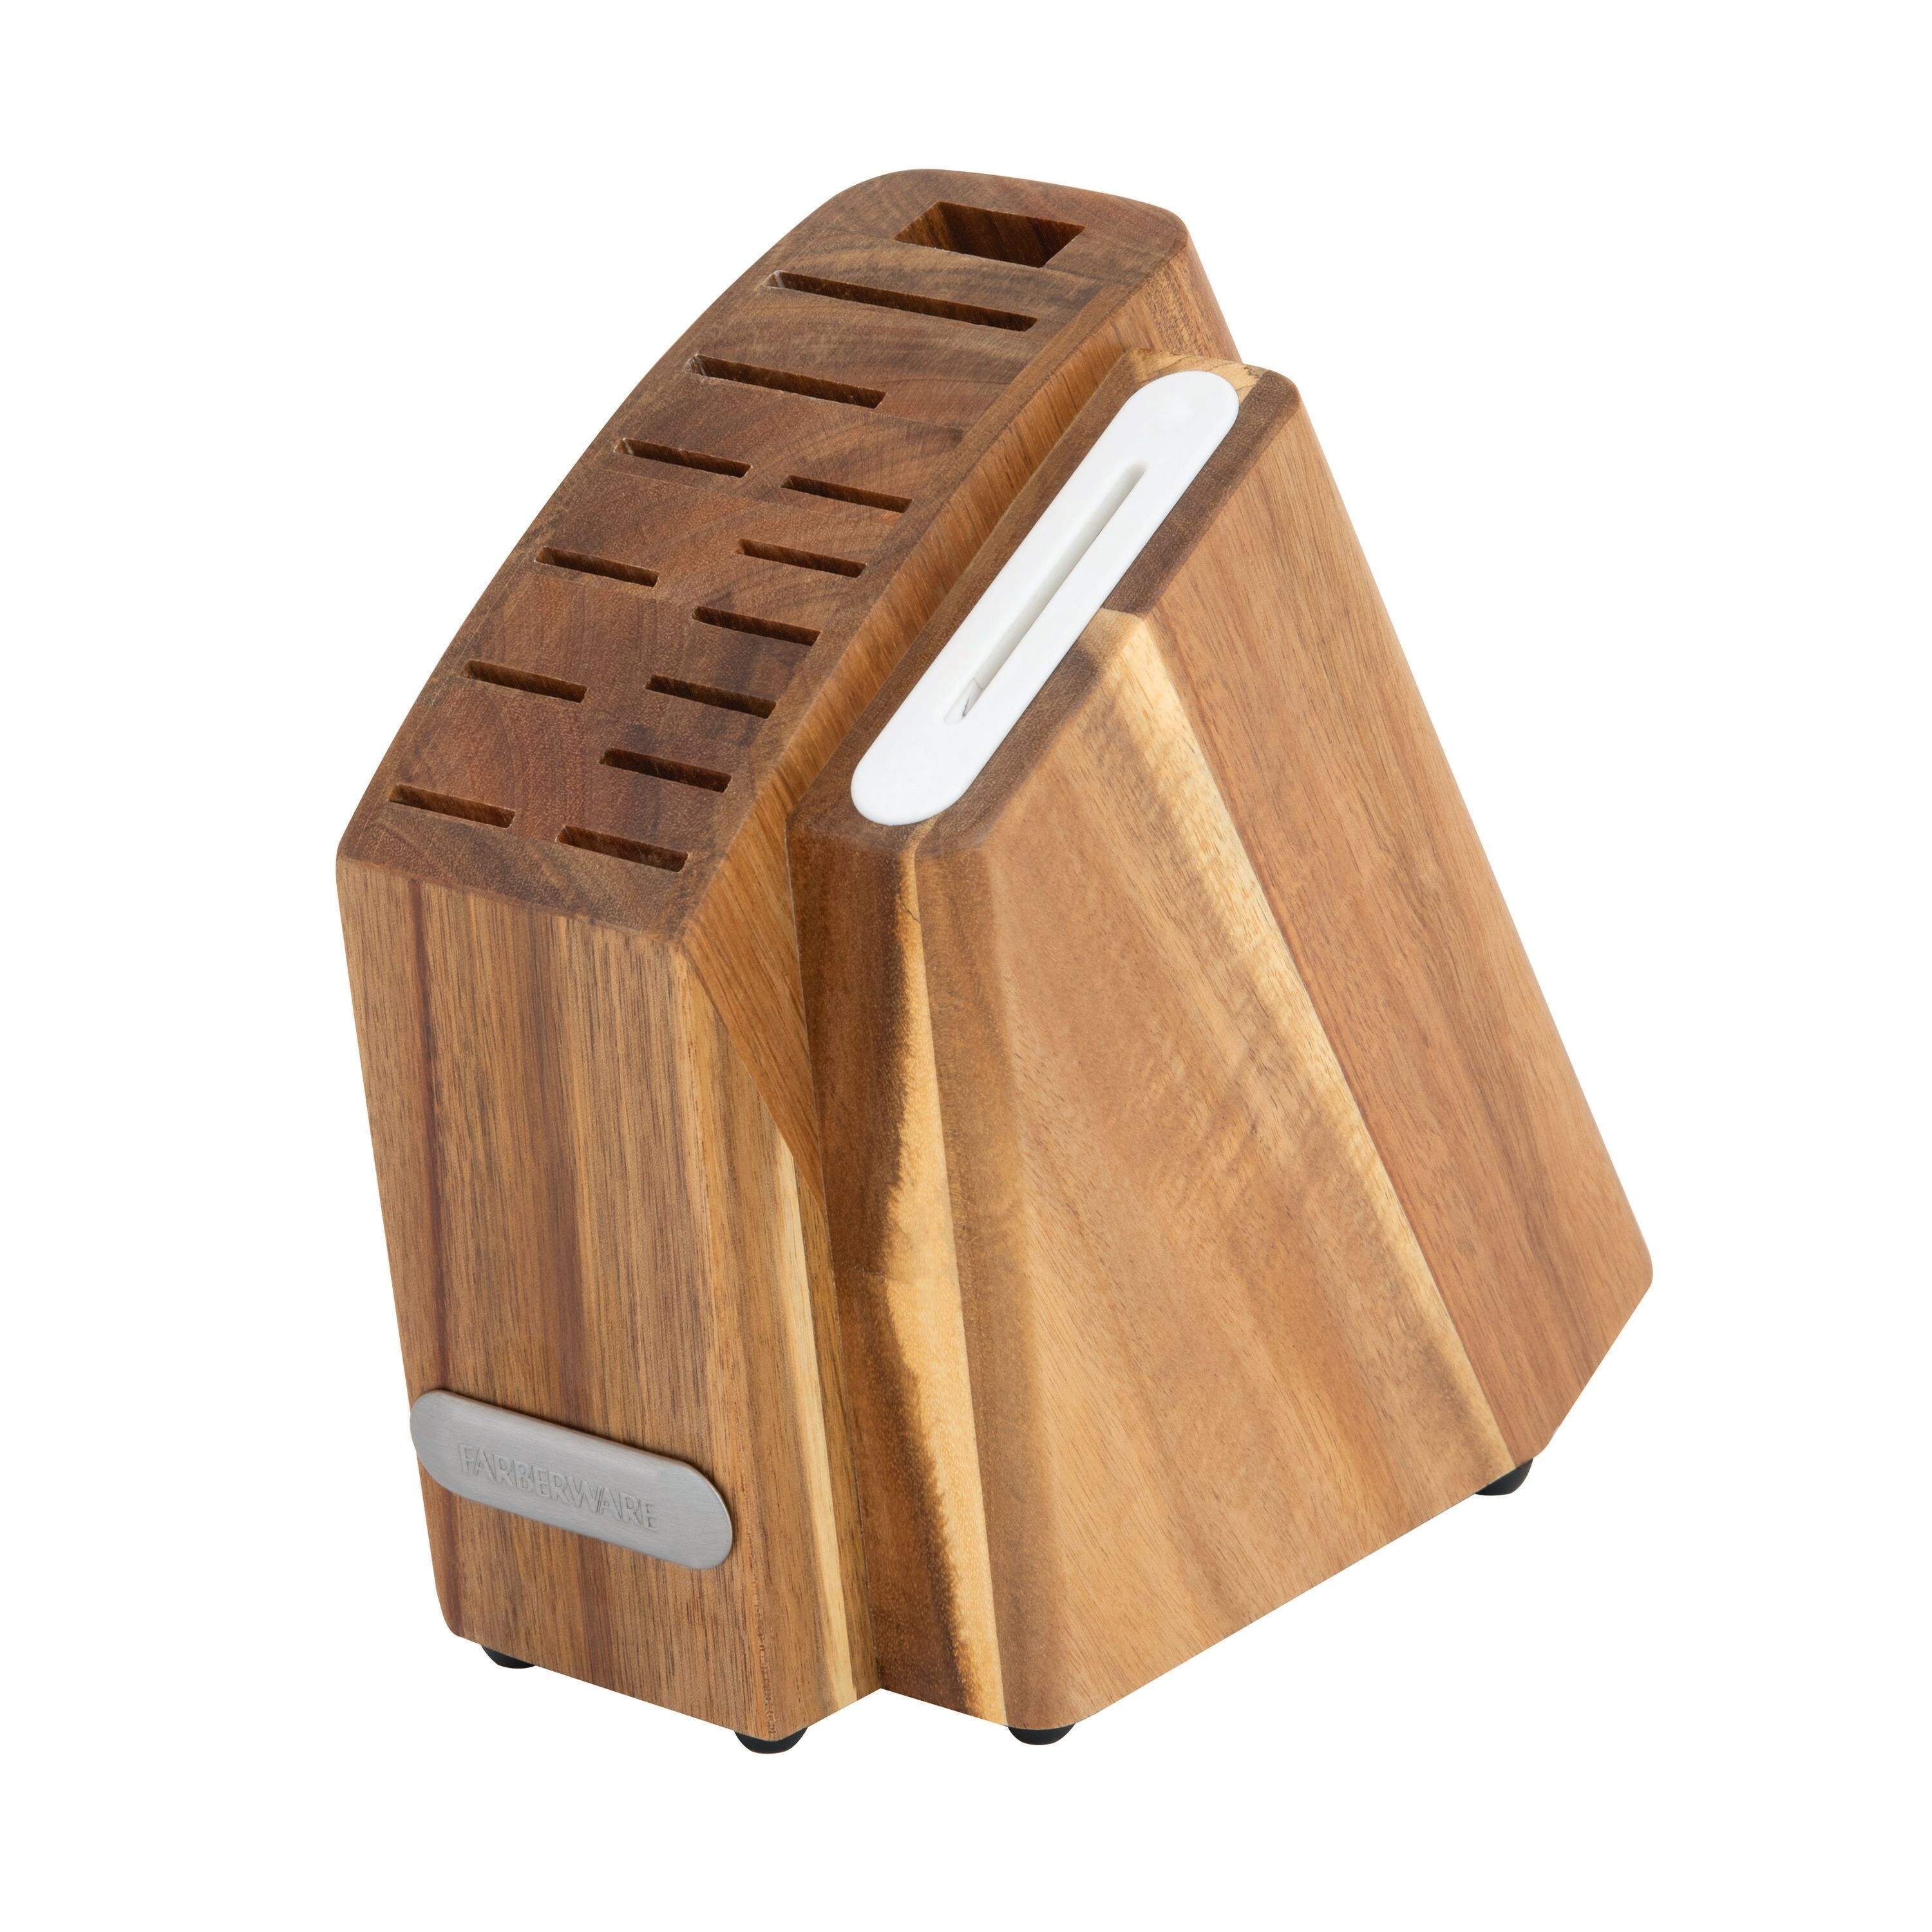 https://ak1.ostkcdn.com/images/products/is/images/direct/369c254534feaea0498a3e8bb439e37d0e28c6cc/Triple-Riveted-Slim-Acacia-Knife-Block-Set-with-Built-in-Sharpener-14-piece-in-White.jpg